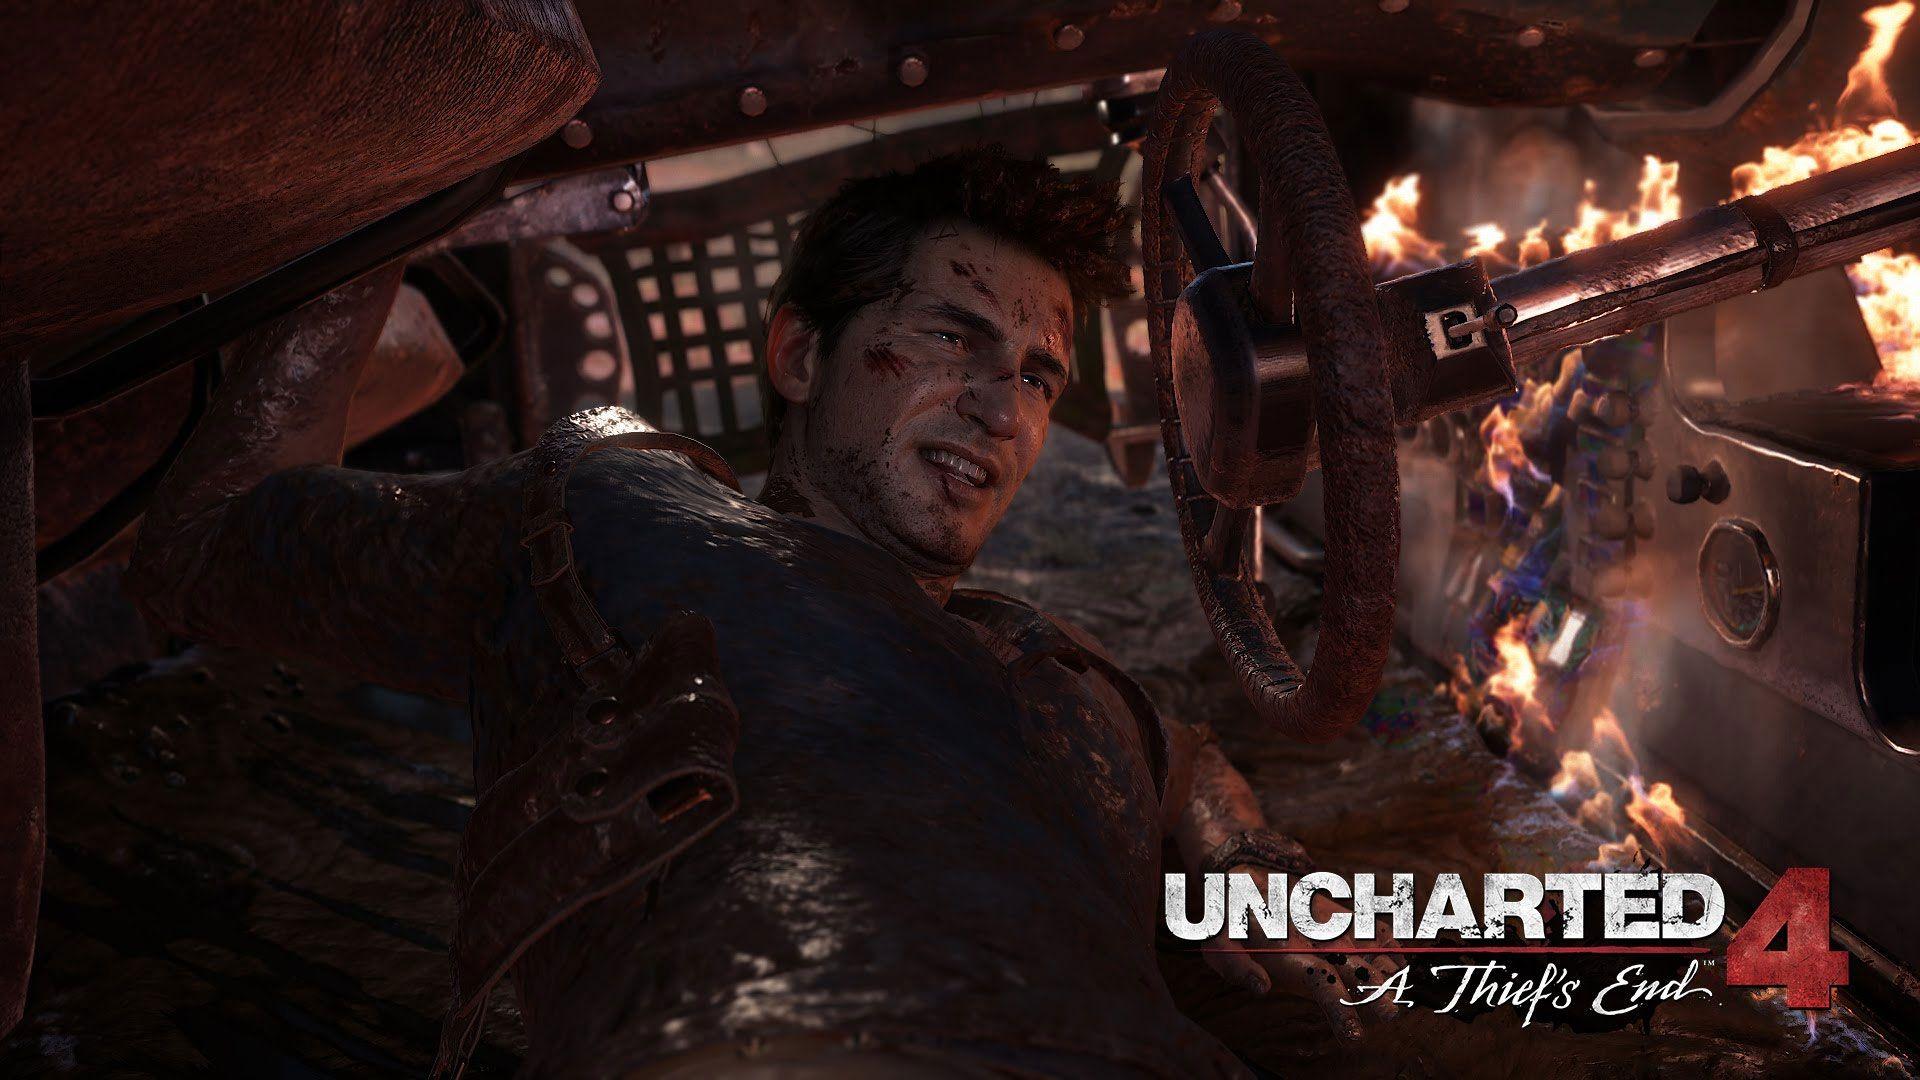 Uncharted 4: A Thief's End Wallpaper in Ultra HDK